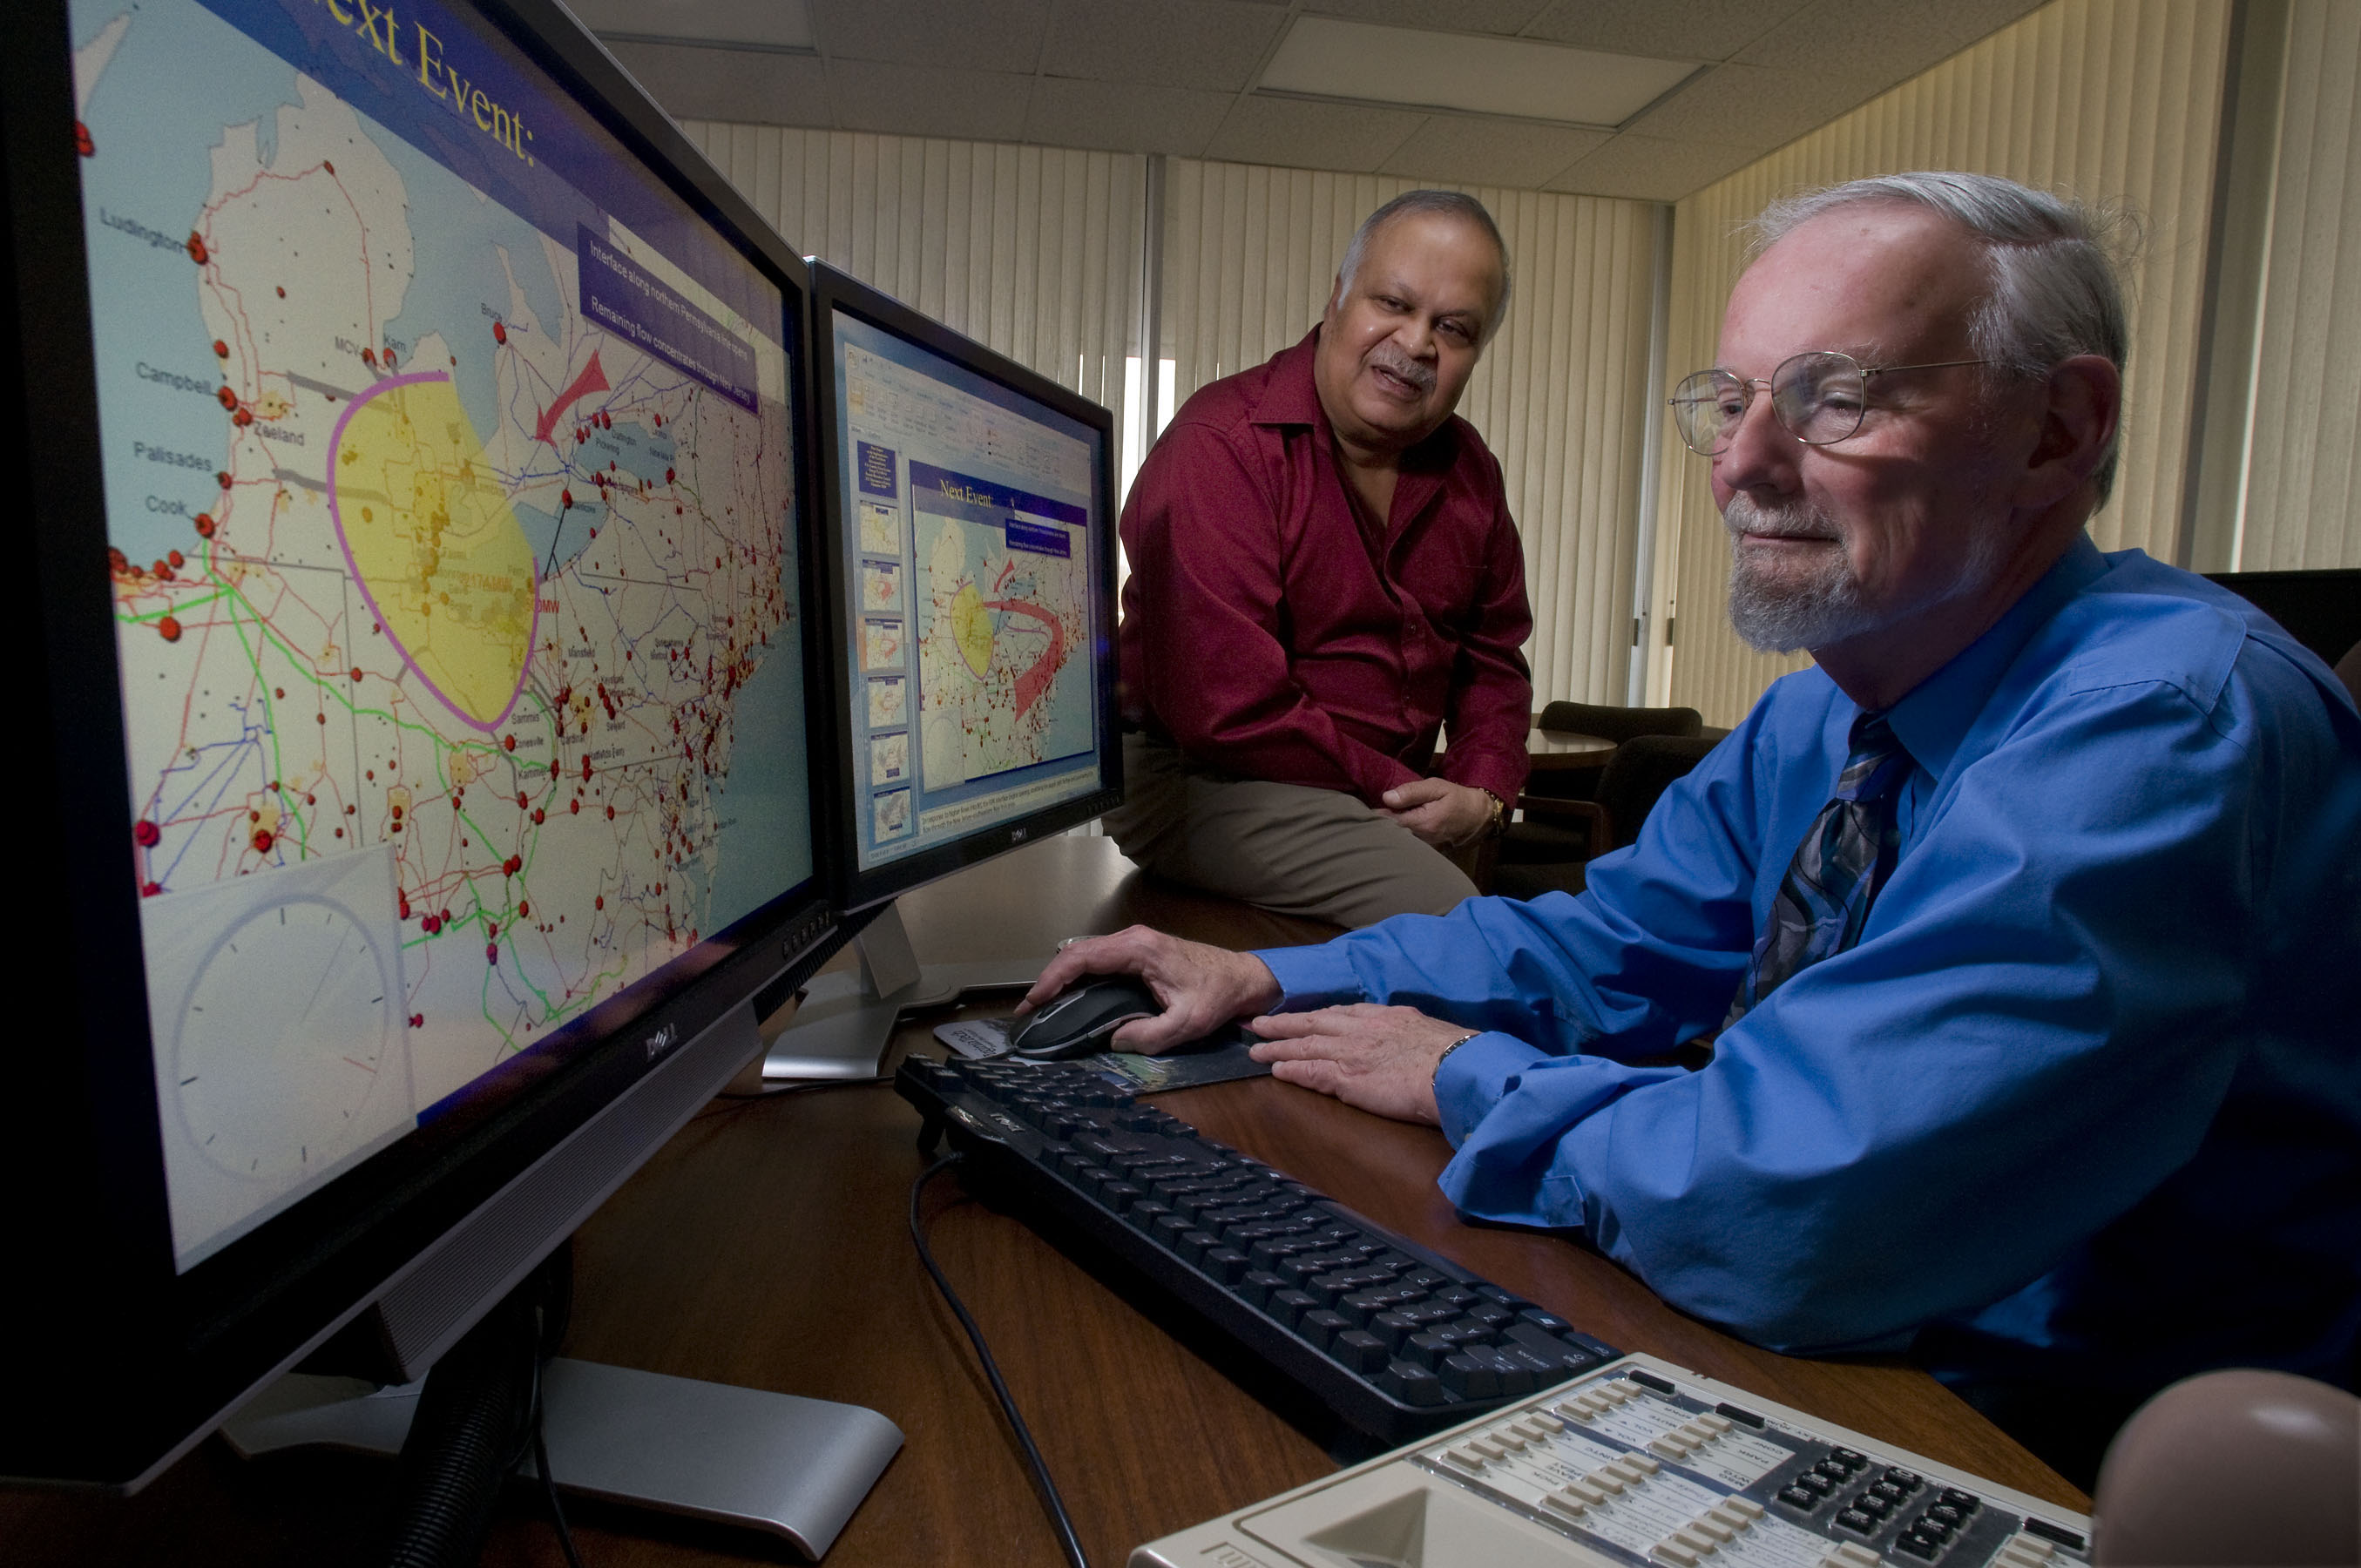 Jim Thorp (right) and Arun Phadke, Virginia Tech emeriti professors of electrical and computer engineering, are strongly involved in projects which amount to more than 50 percent of the available U.S. Department of Energy stimulus awards to modernize the electric grid system and to improve the security and reliability of the energy infrastructure.